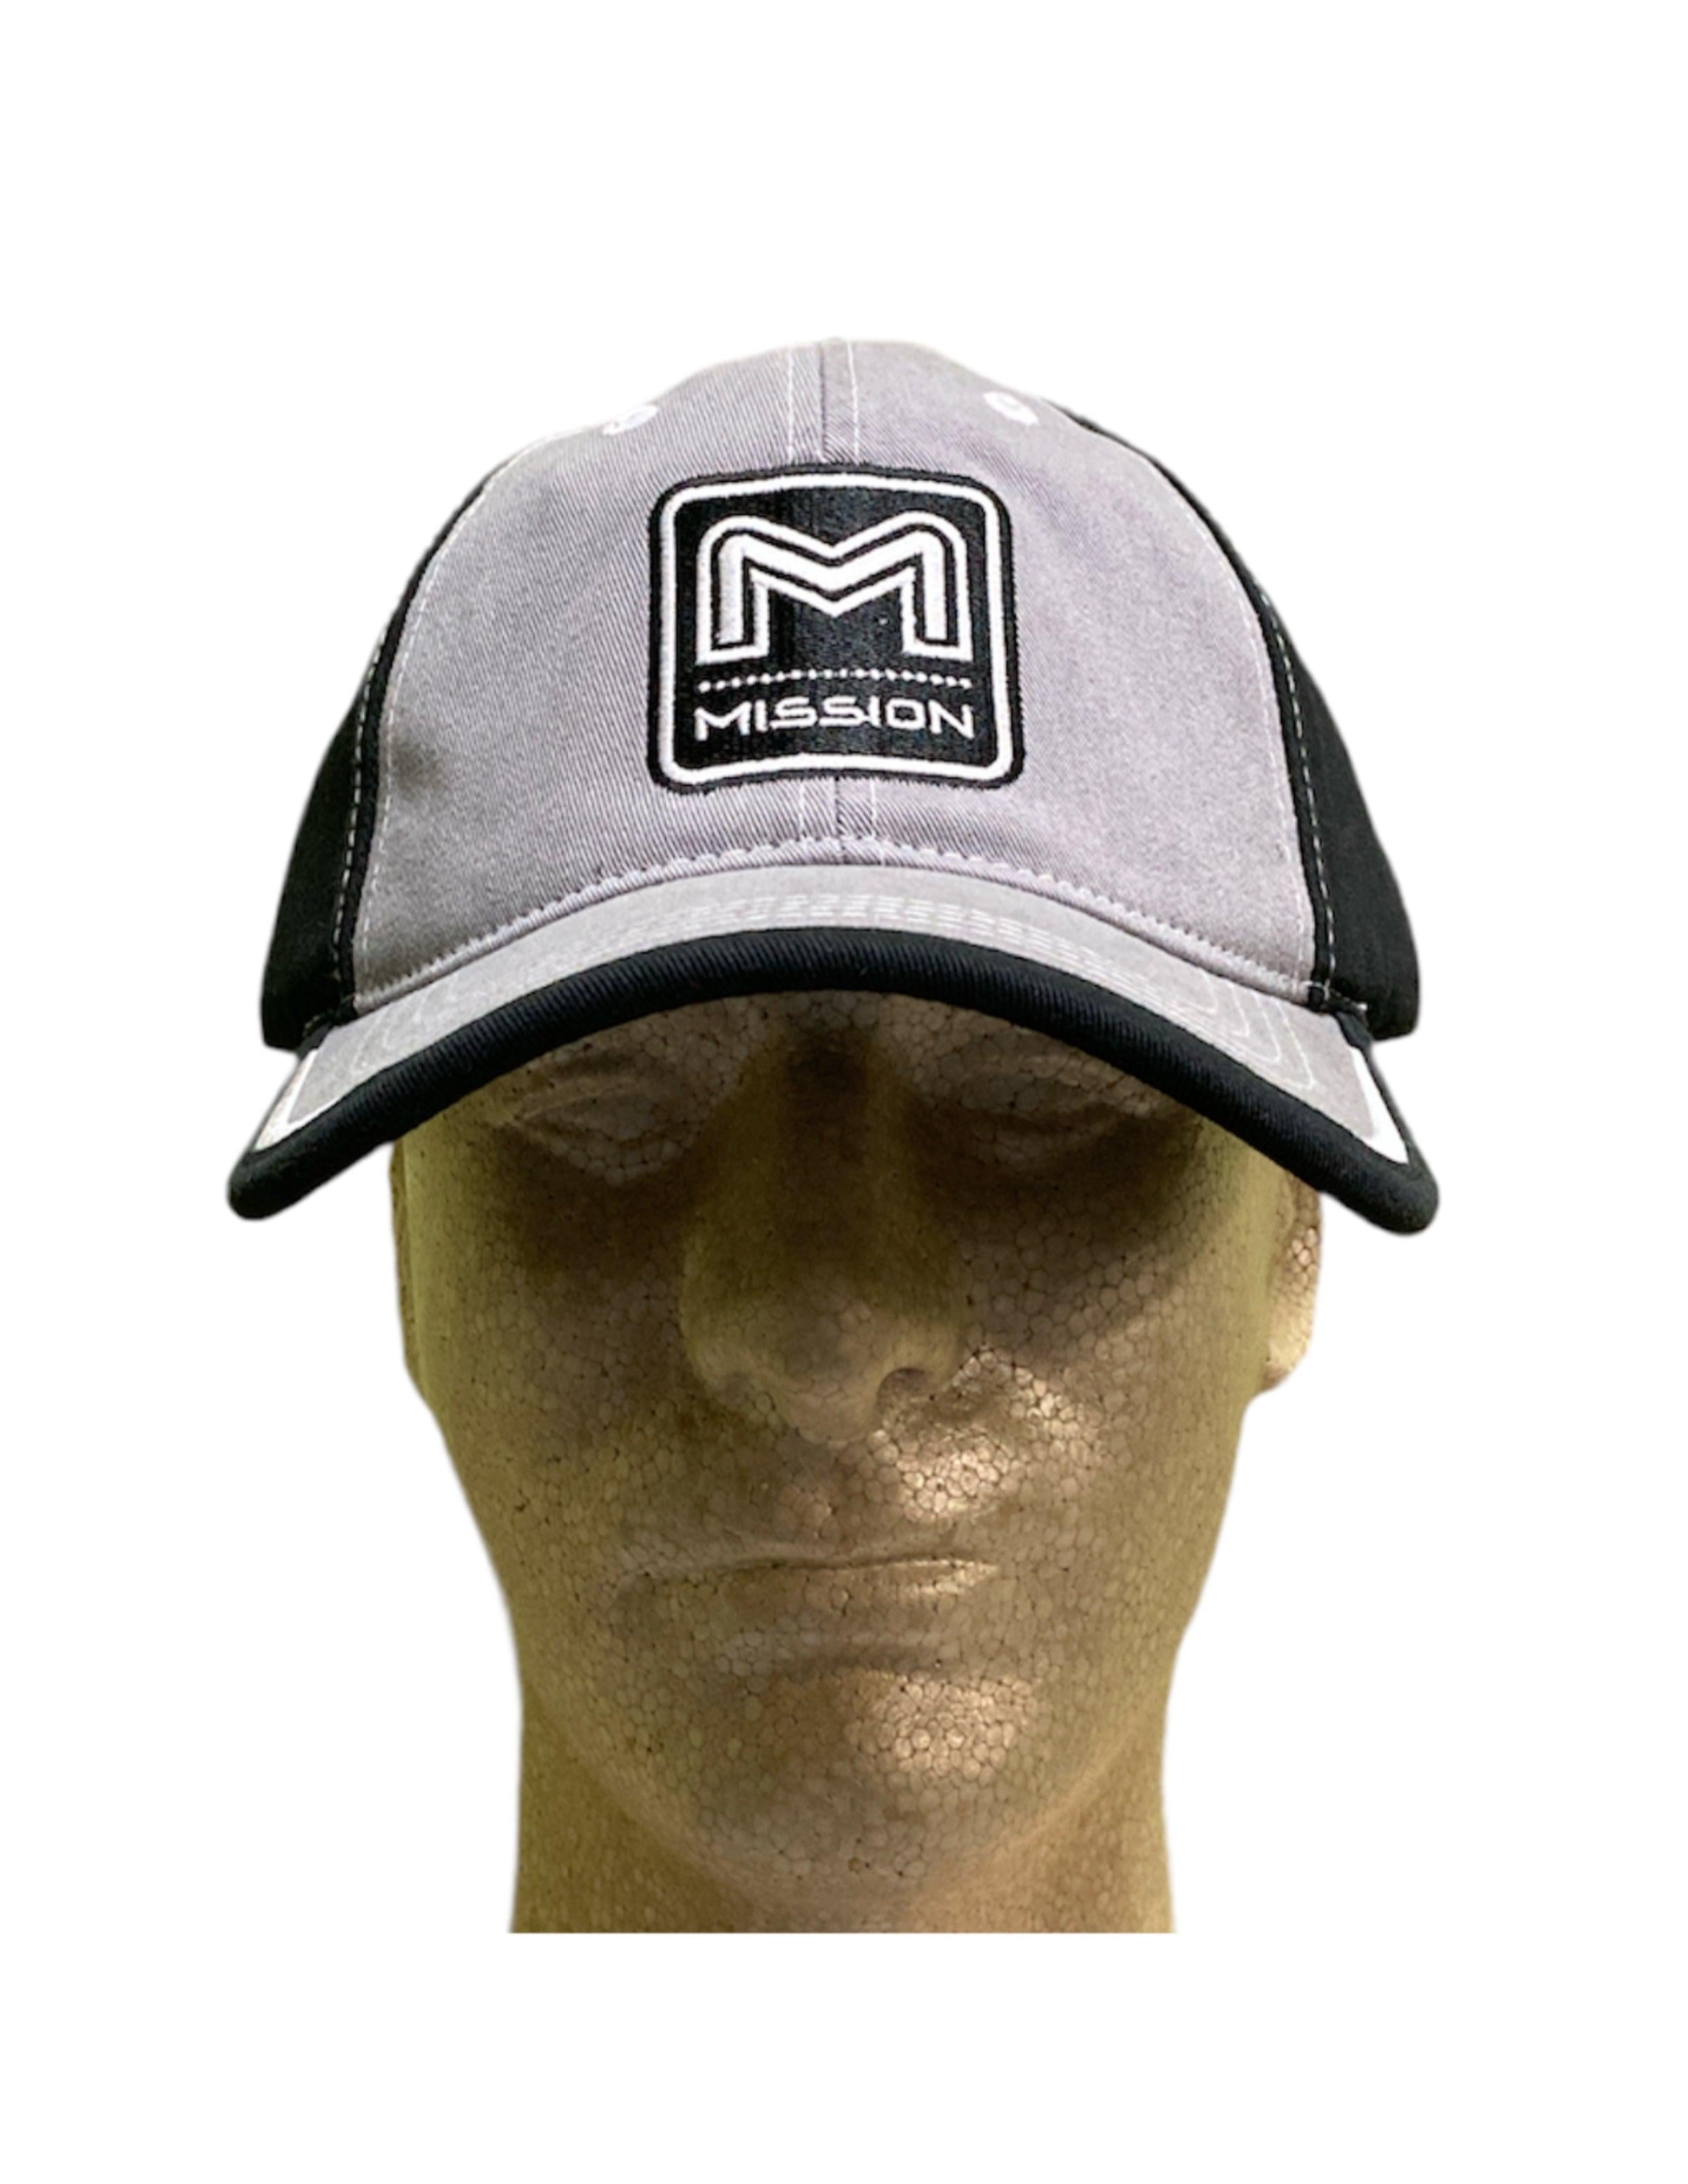 Mission Archery Black/Grey Block Hat - Leapfrog Outdoor Sports and Apparel